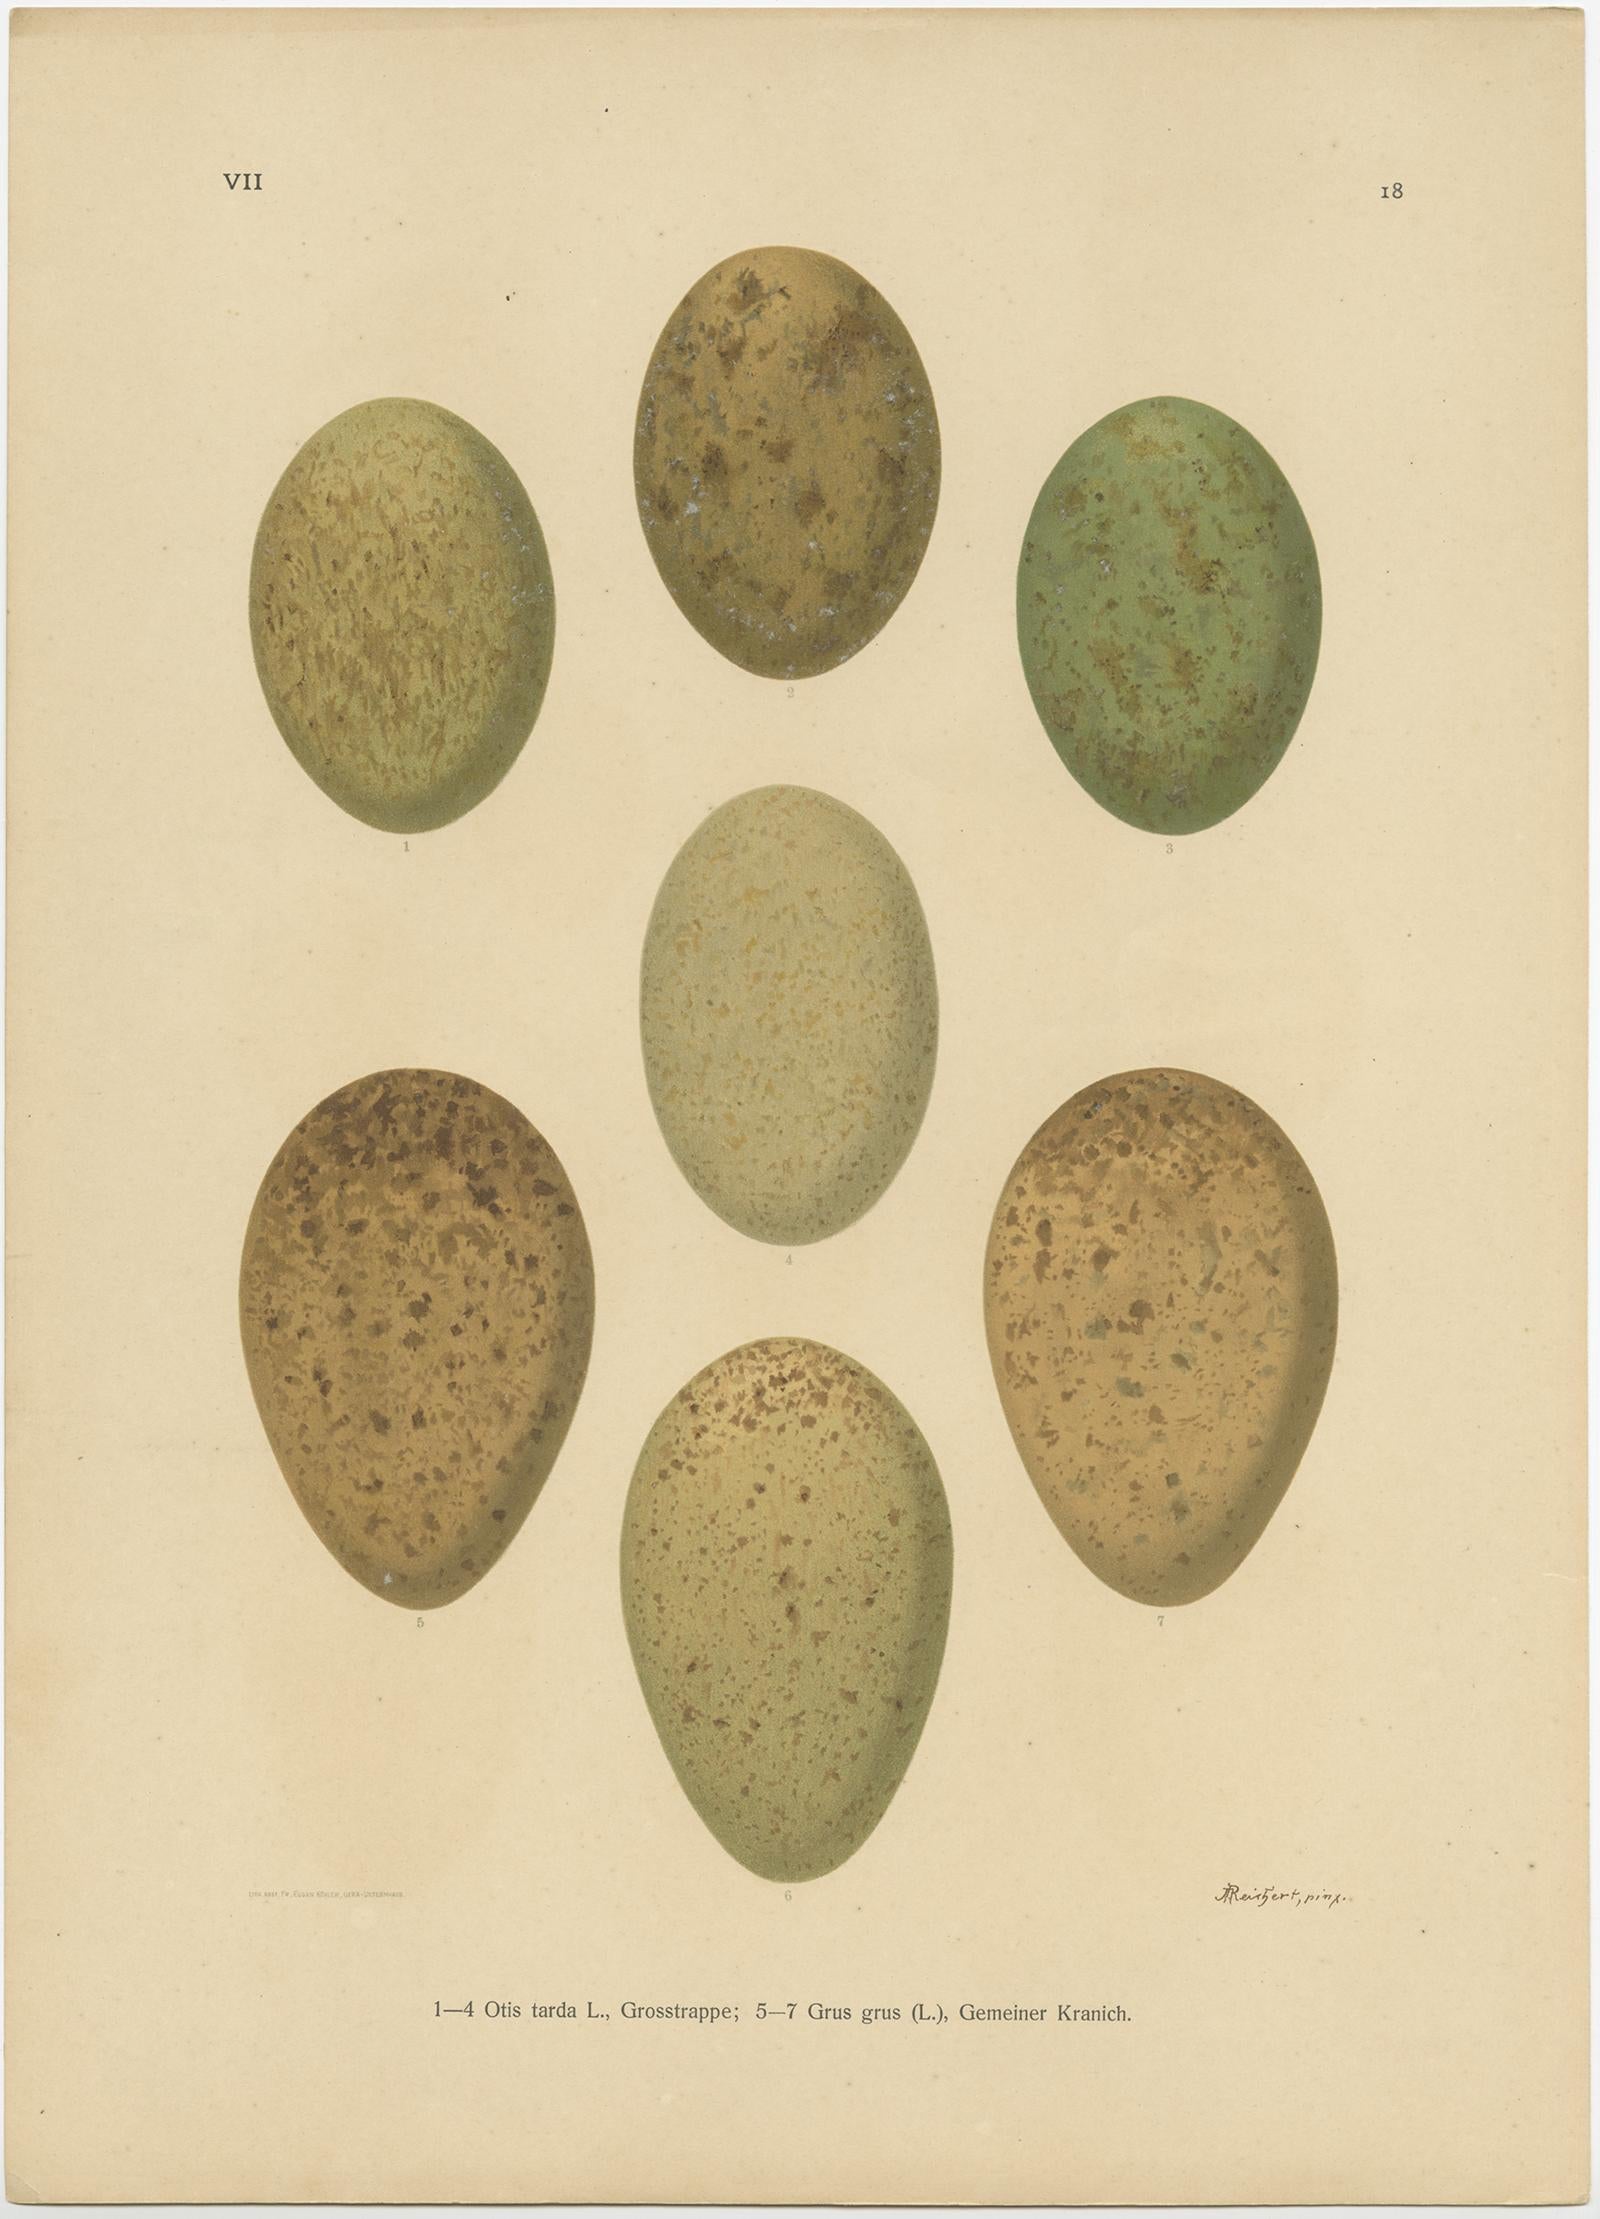 The set of three antique prints depicting various bird's eggs is a fine example of the detailed ornithological work that Johann Andreas Naumann, son of Johann Friedrich Naumann, contributed to the updated versions of his father's comprehensive and